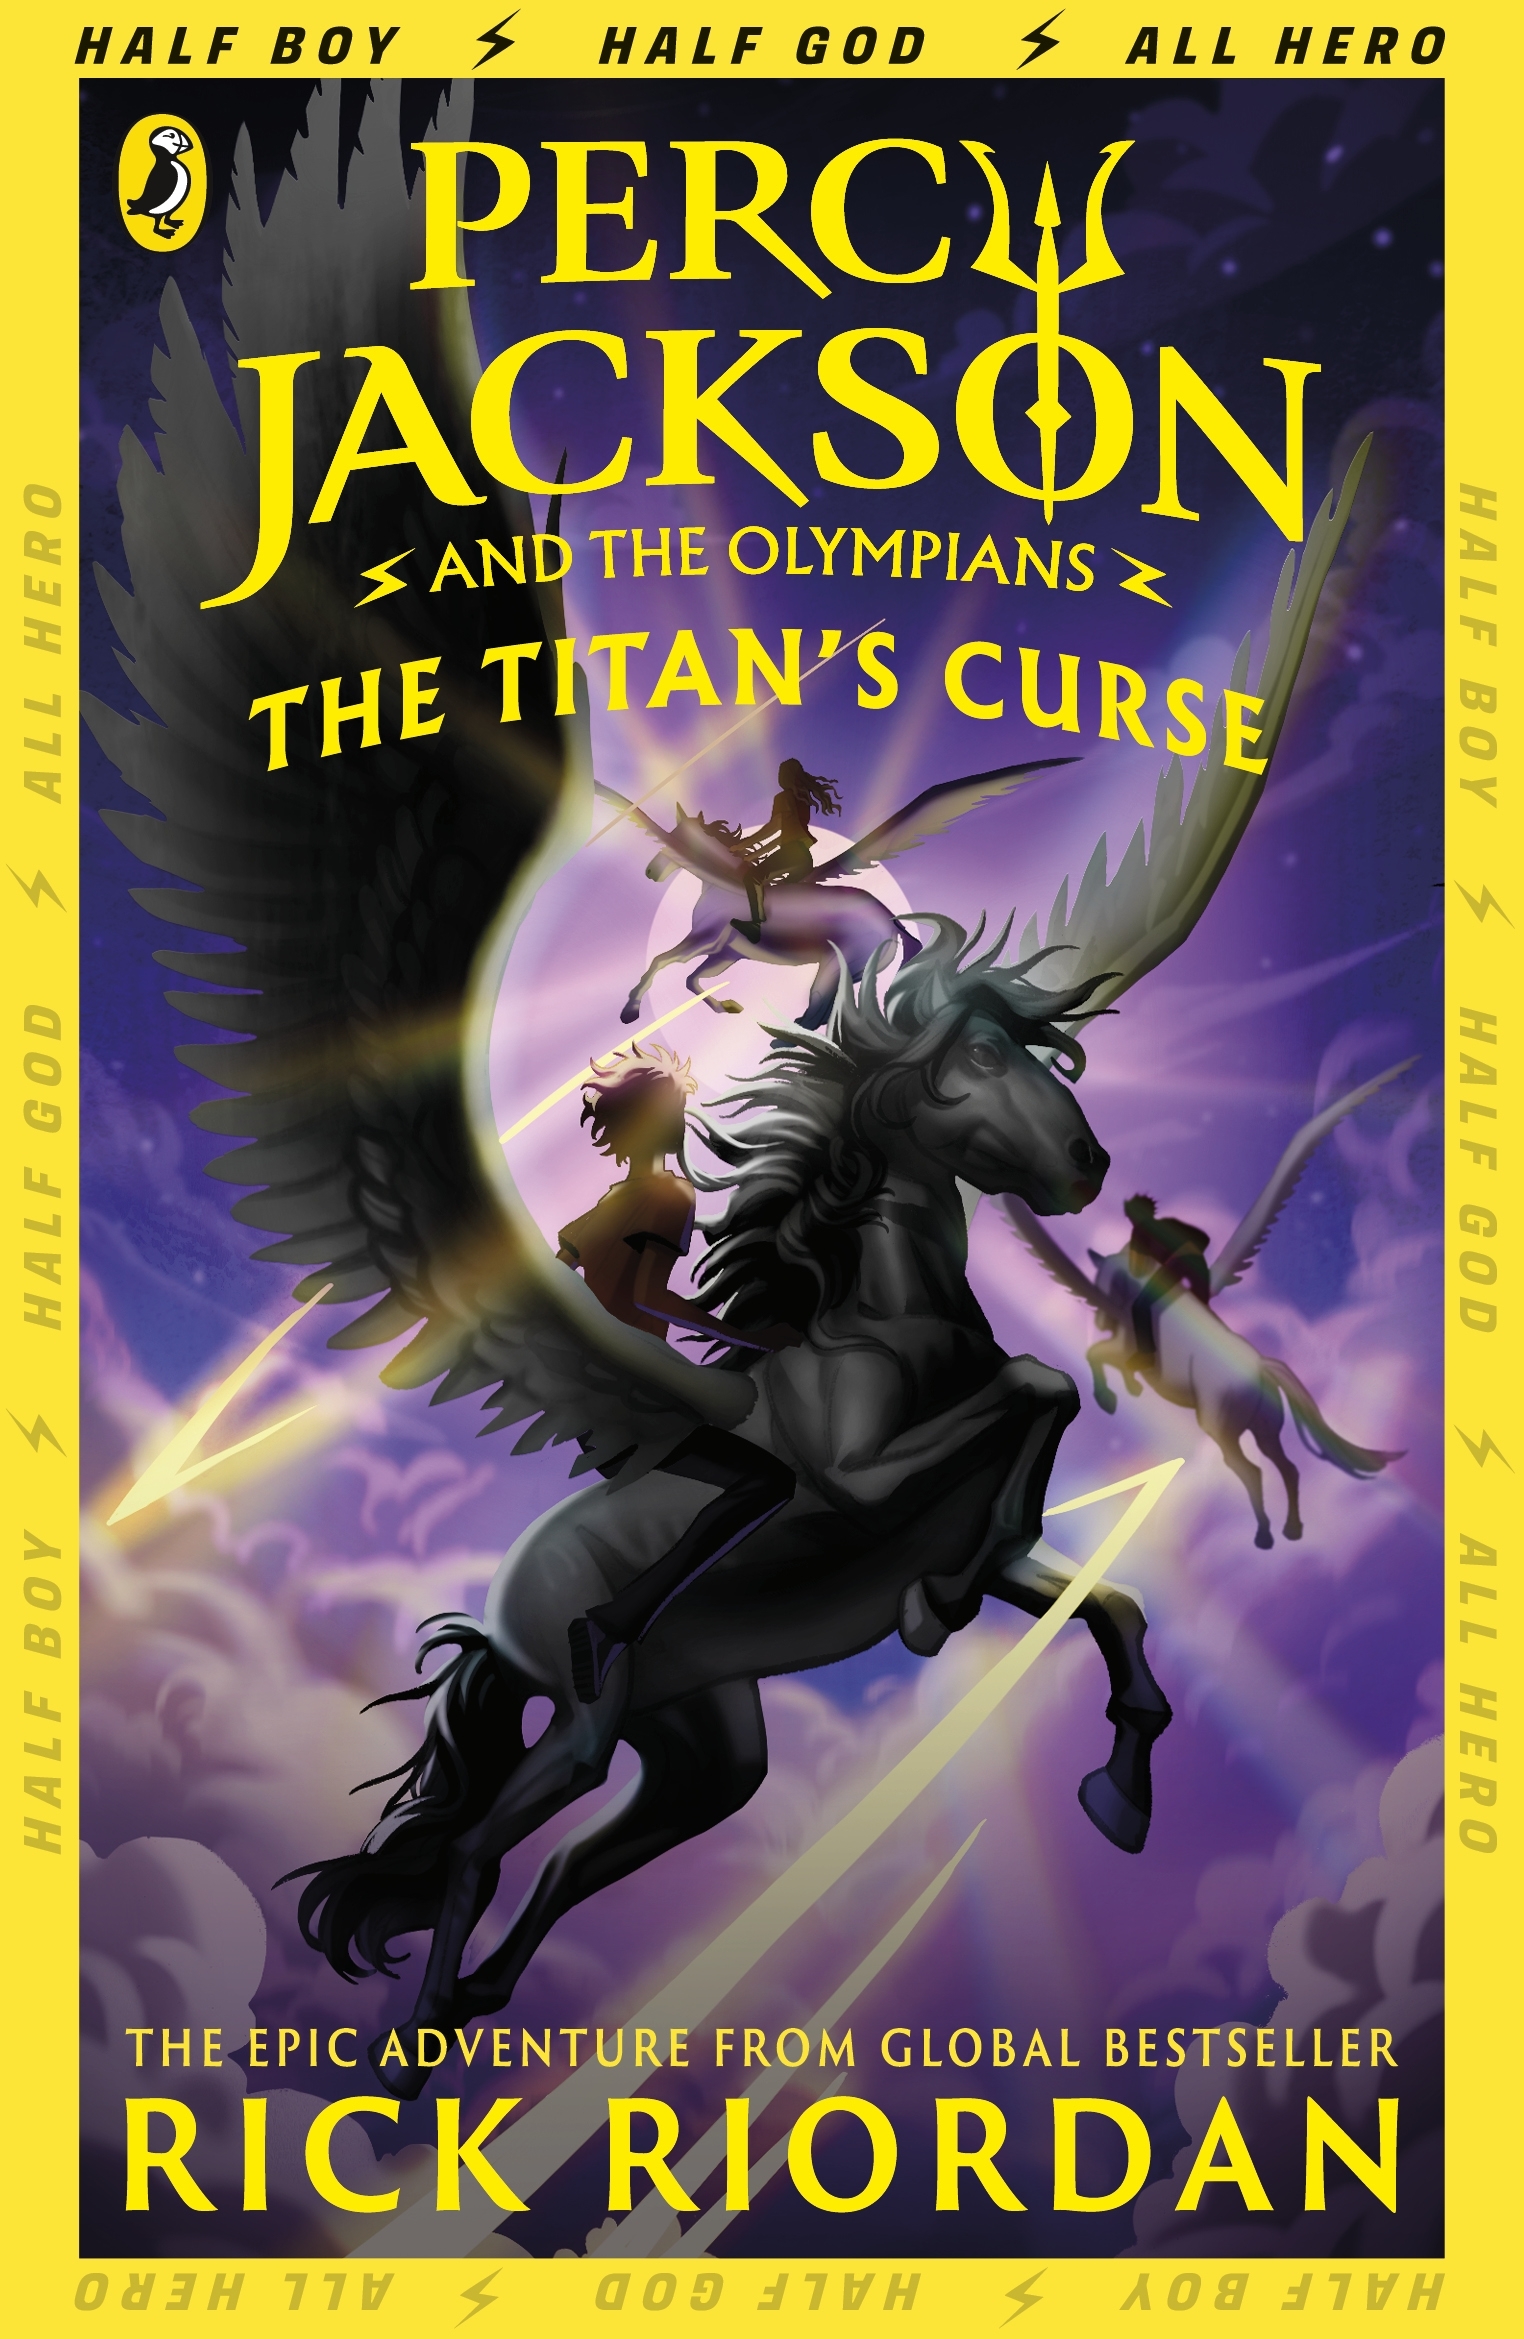 Percy Jackson And The Lightning Thief (book 1) By Rick Riordan 171